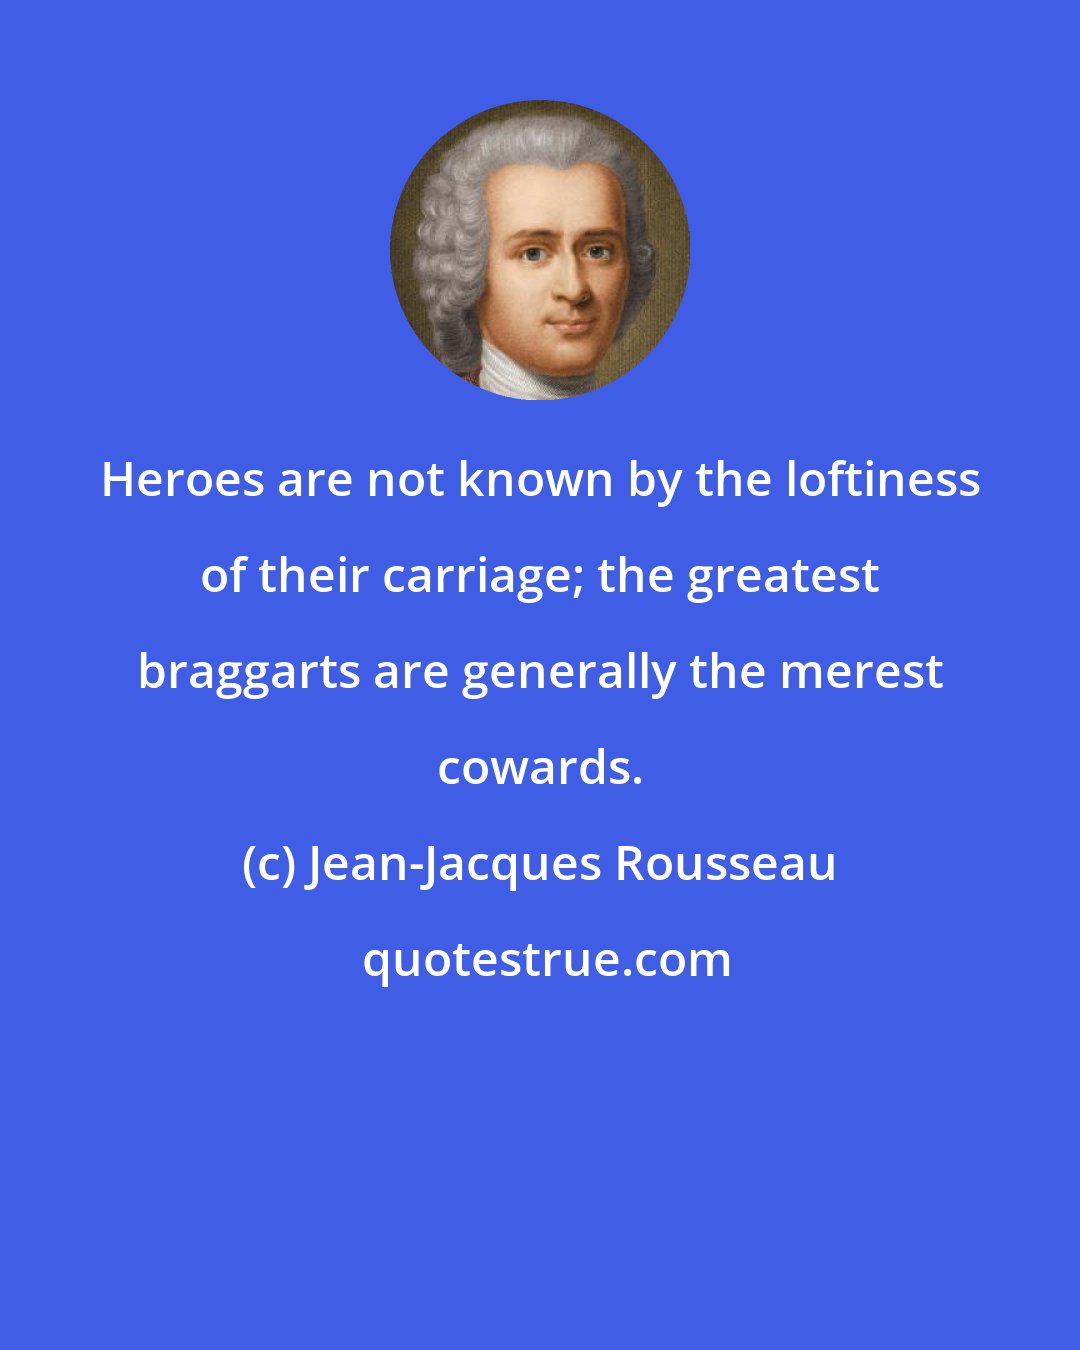 Jean-Jacques Rousseau: Heroes are not known by the loftiness of their carriage; the greatest braggarts are generally the merest cowards.